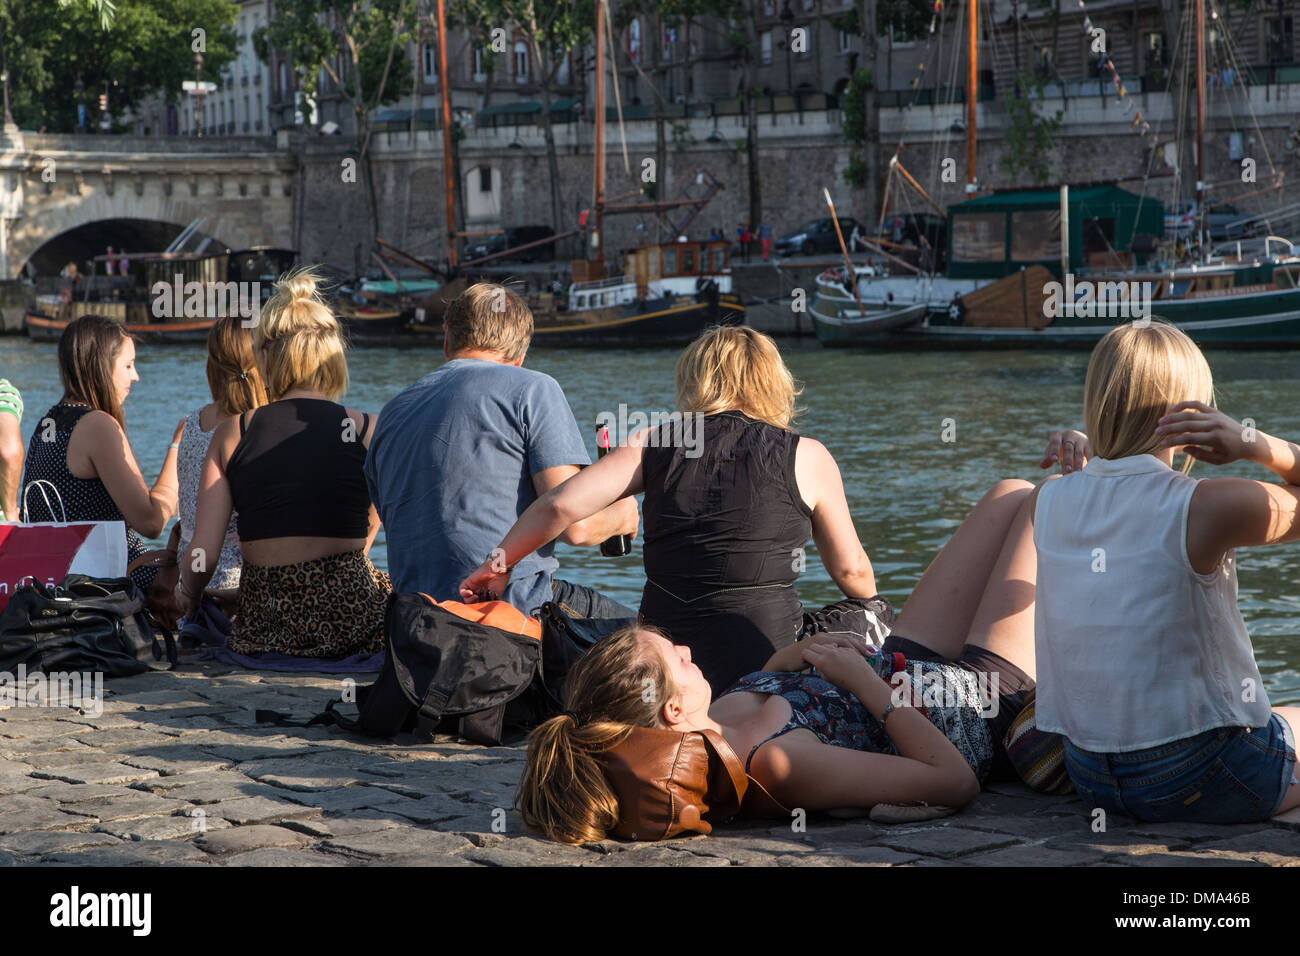 RELAXING AND PICKNICKING ON THE QUAYS OF THE SEINE, ILE DE LA CITE WITH THE PONT NEUF BRIDGE AND SAILBOATS IN FRONT OF THE SQUARE DU VERT GALANT, QUAY OF THE LOUVRE, PARIS (75), FRANCE Stock Photo